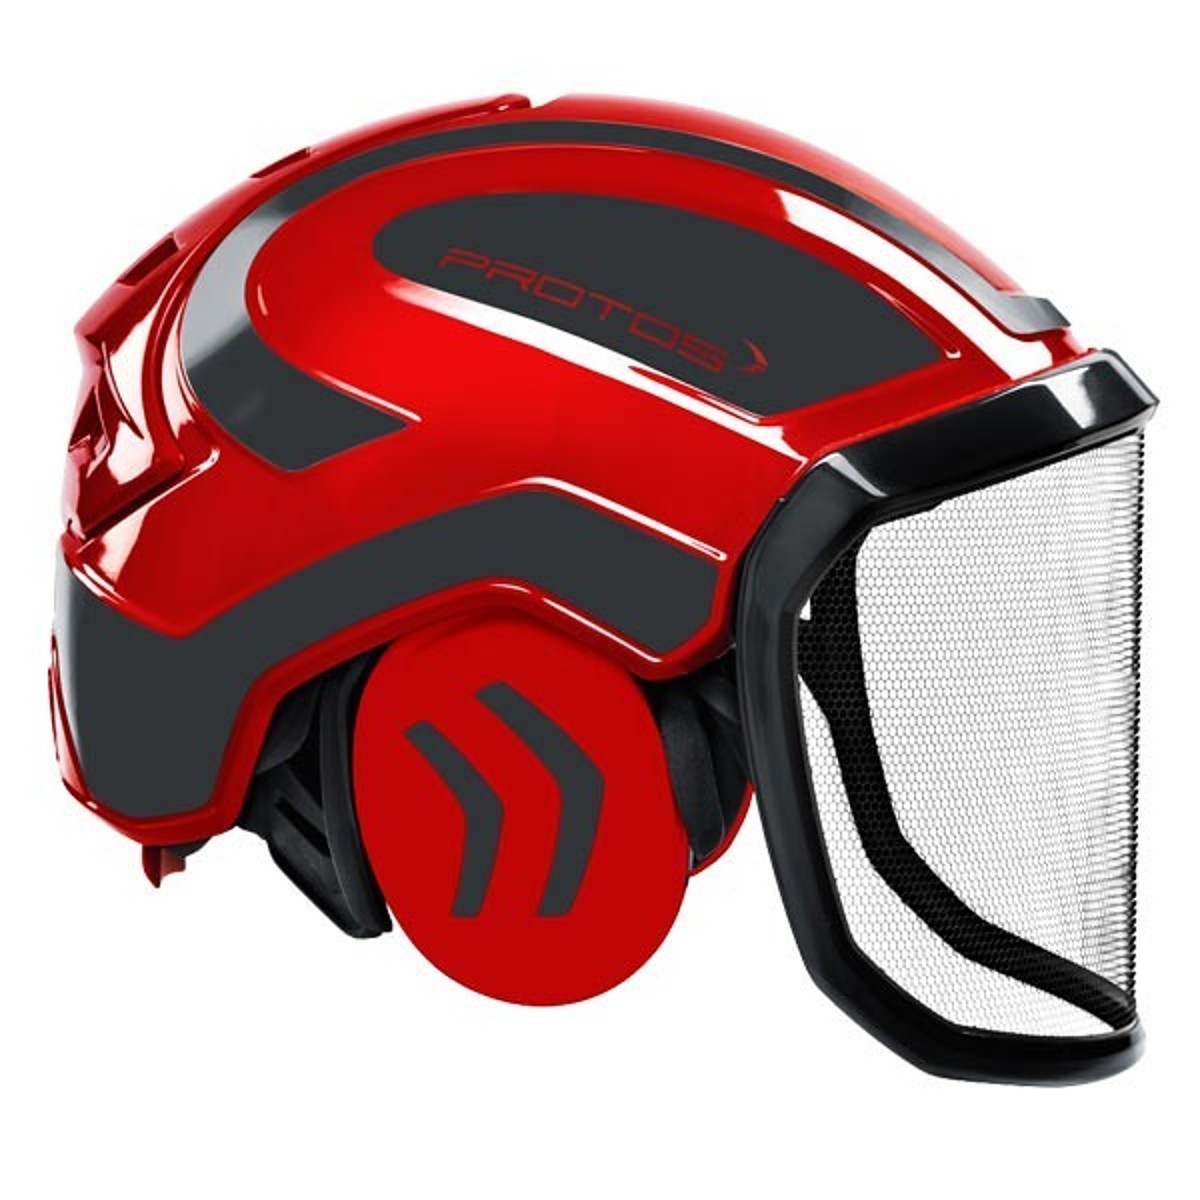 Protos Helm Integral Forest